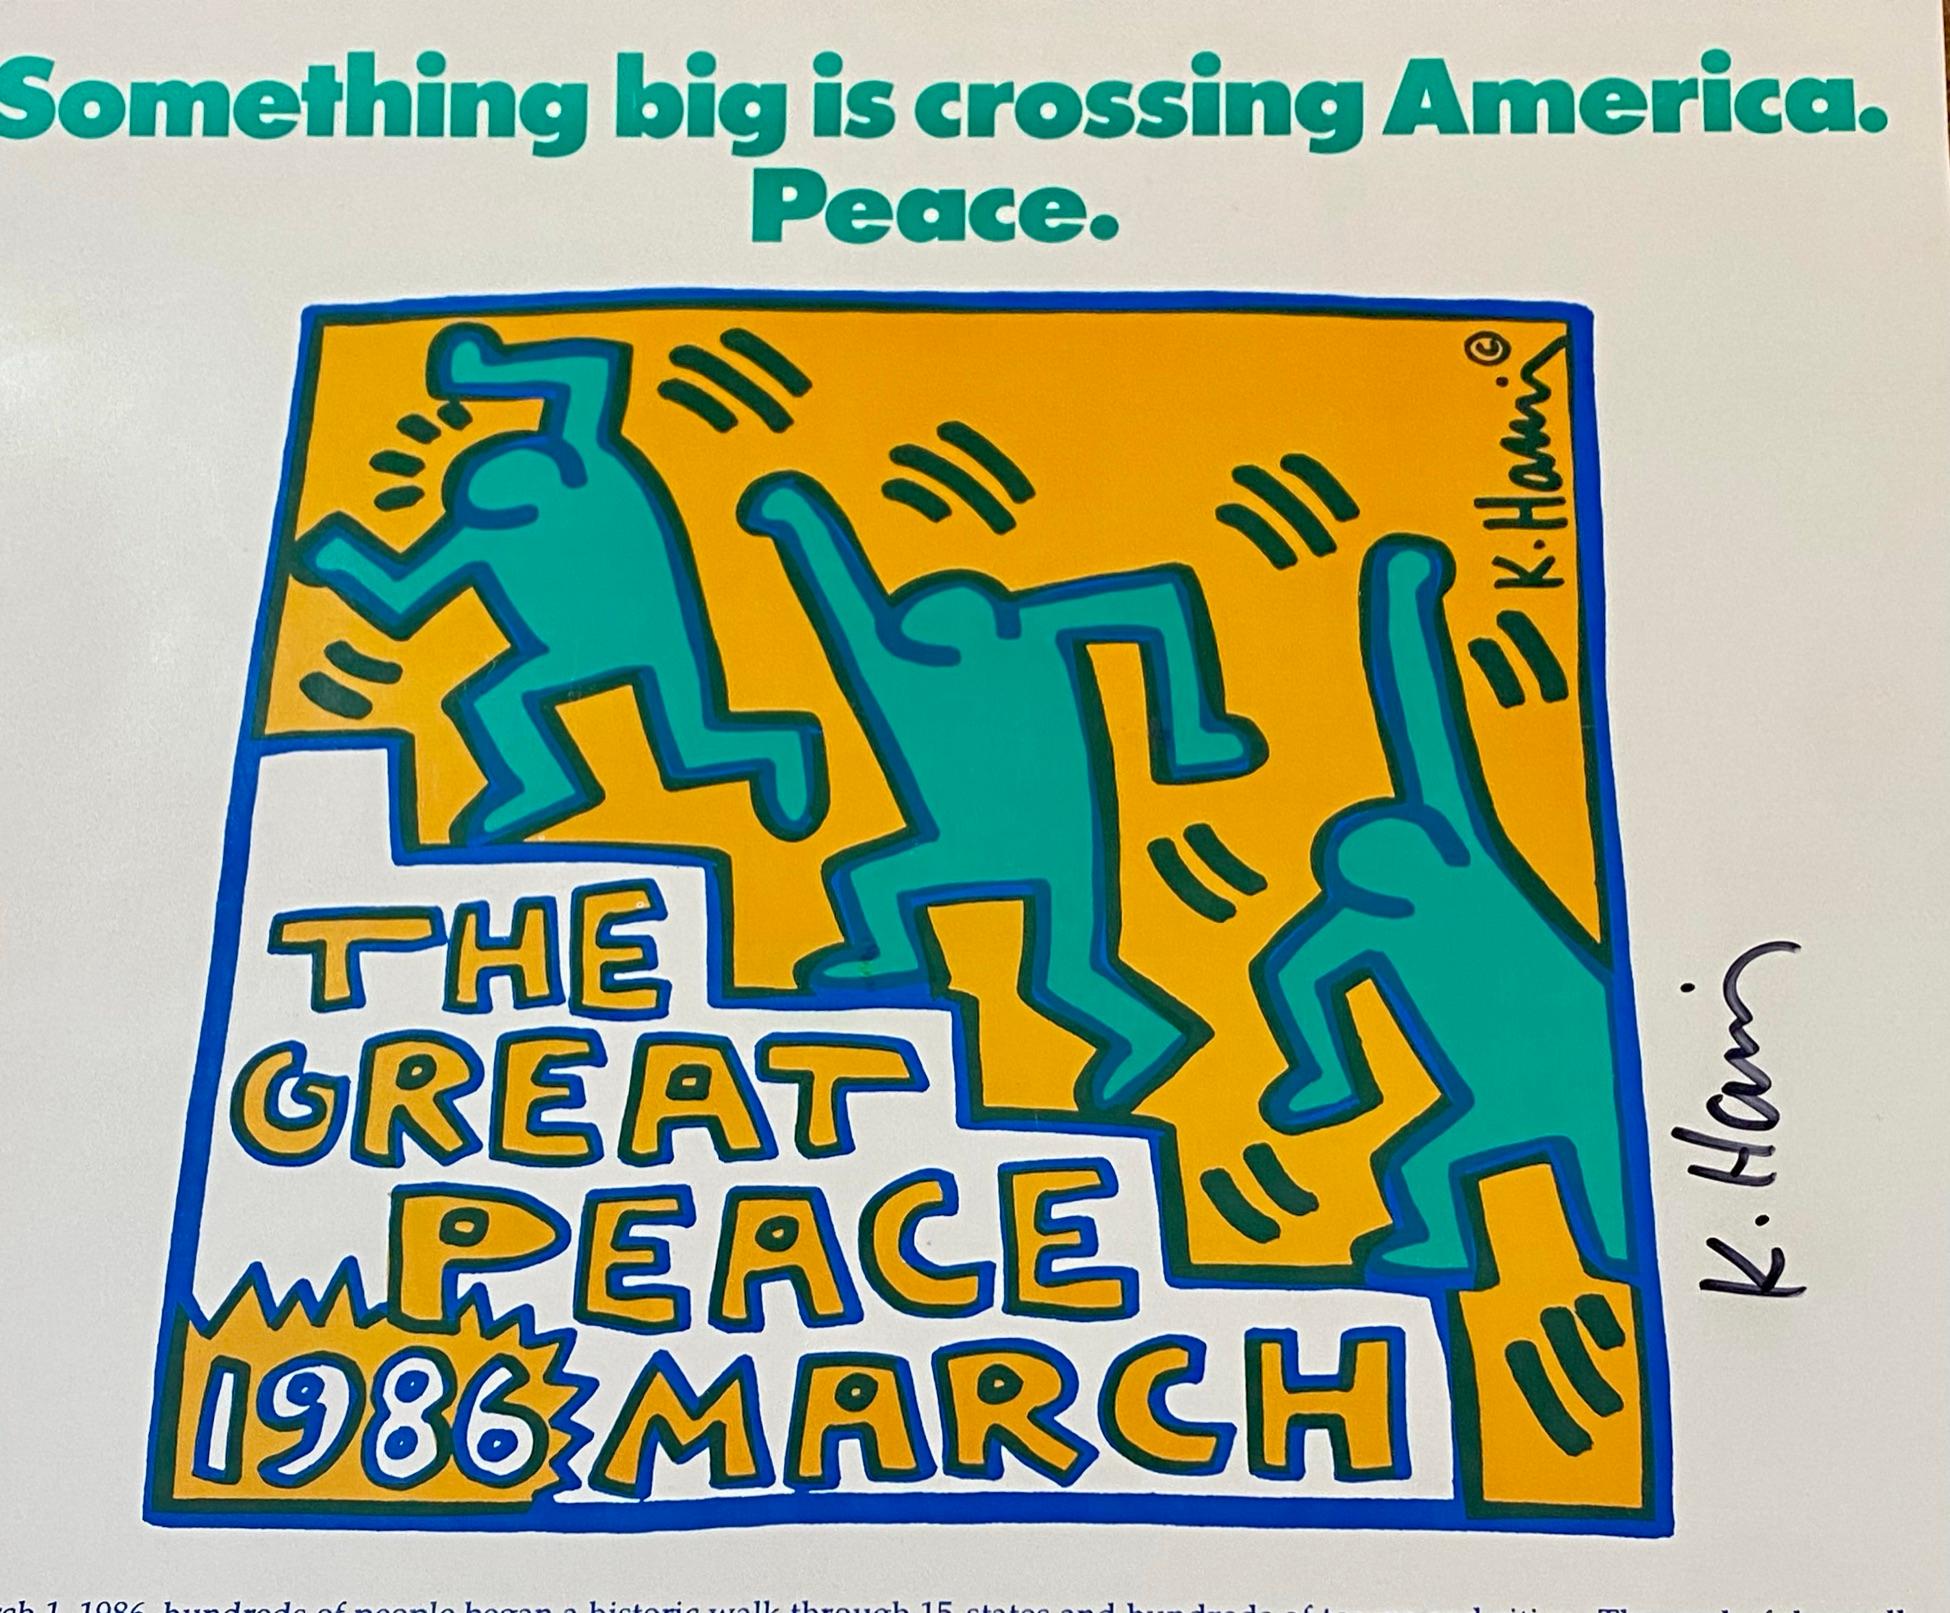 Signed Keith Haring, The Great Peace March 1986:

Keith Haring designed this poster for the anti-nuclear demonstrations held throughout the U.S. during 1986. Hand signed by Haring in black marker in the mid lower right.

Off-set lithograph.
17 x 21